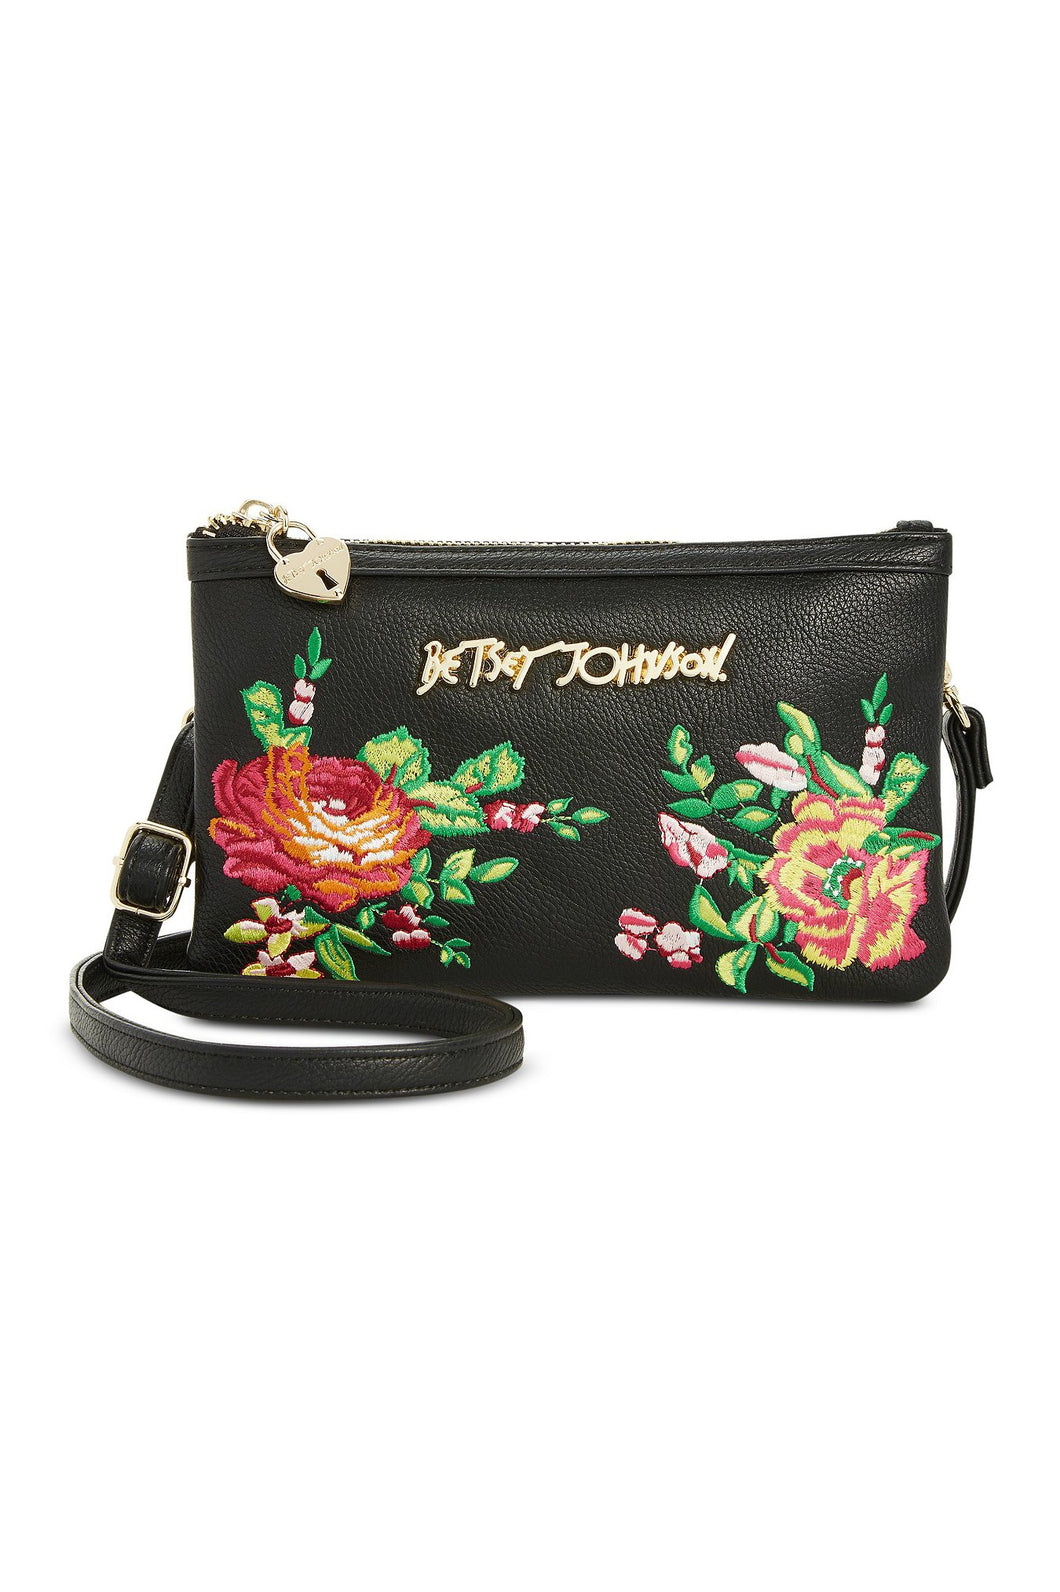 Betsey Johnson Embroidered Convertible Crossbody Phone Charger Black NWT! $58